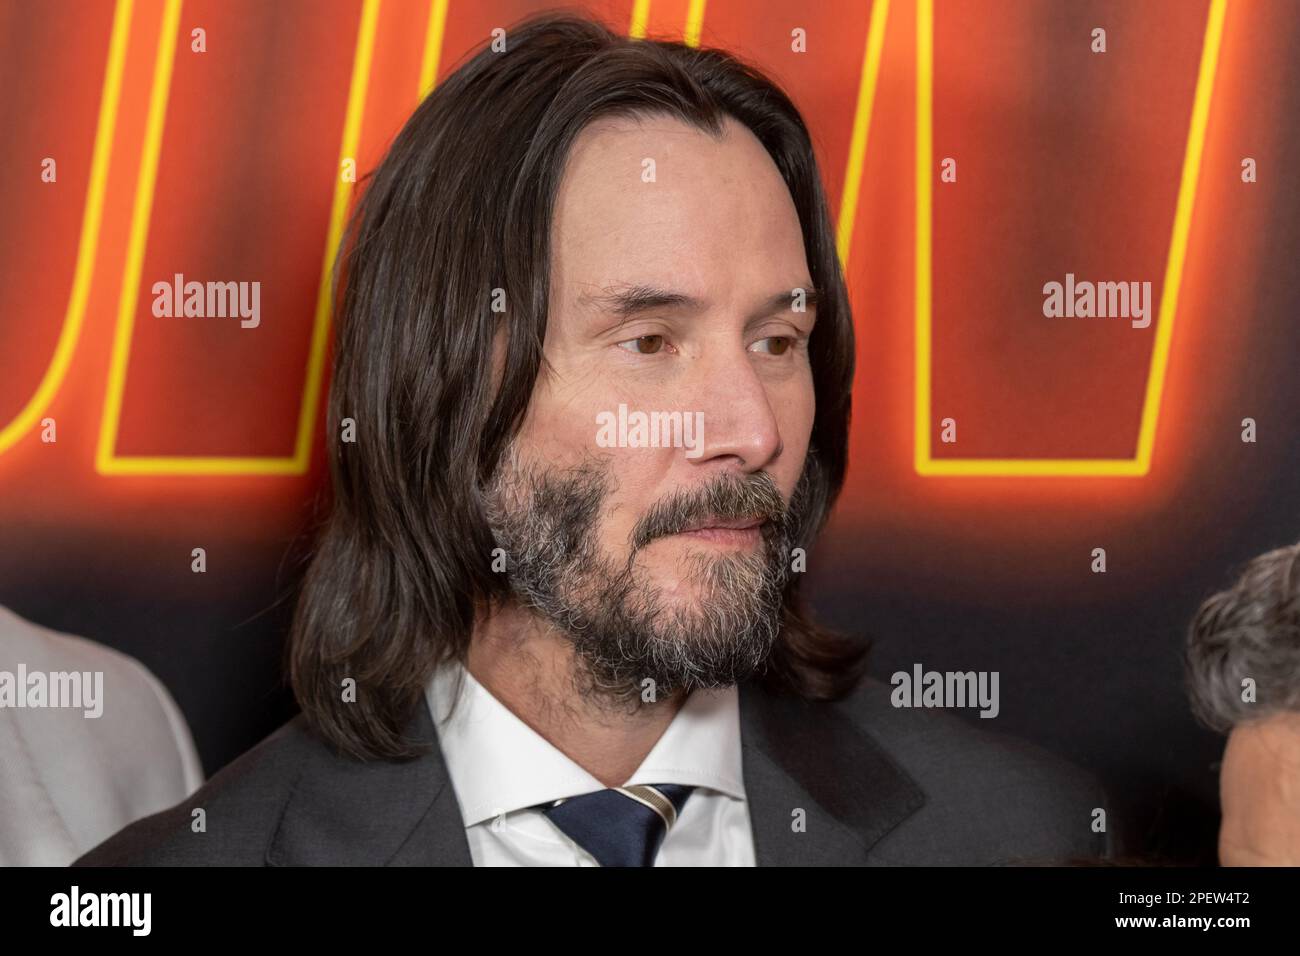 AMC Theatres - Bacon grease was put on Keanu Reeves' face in John